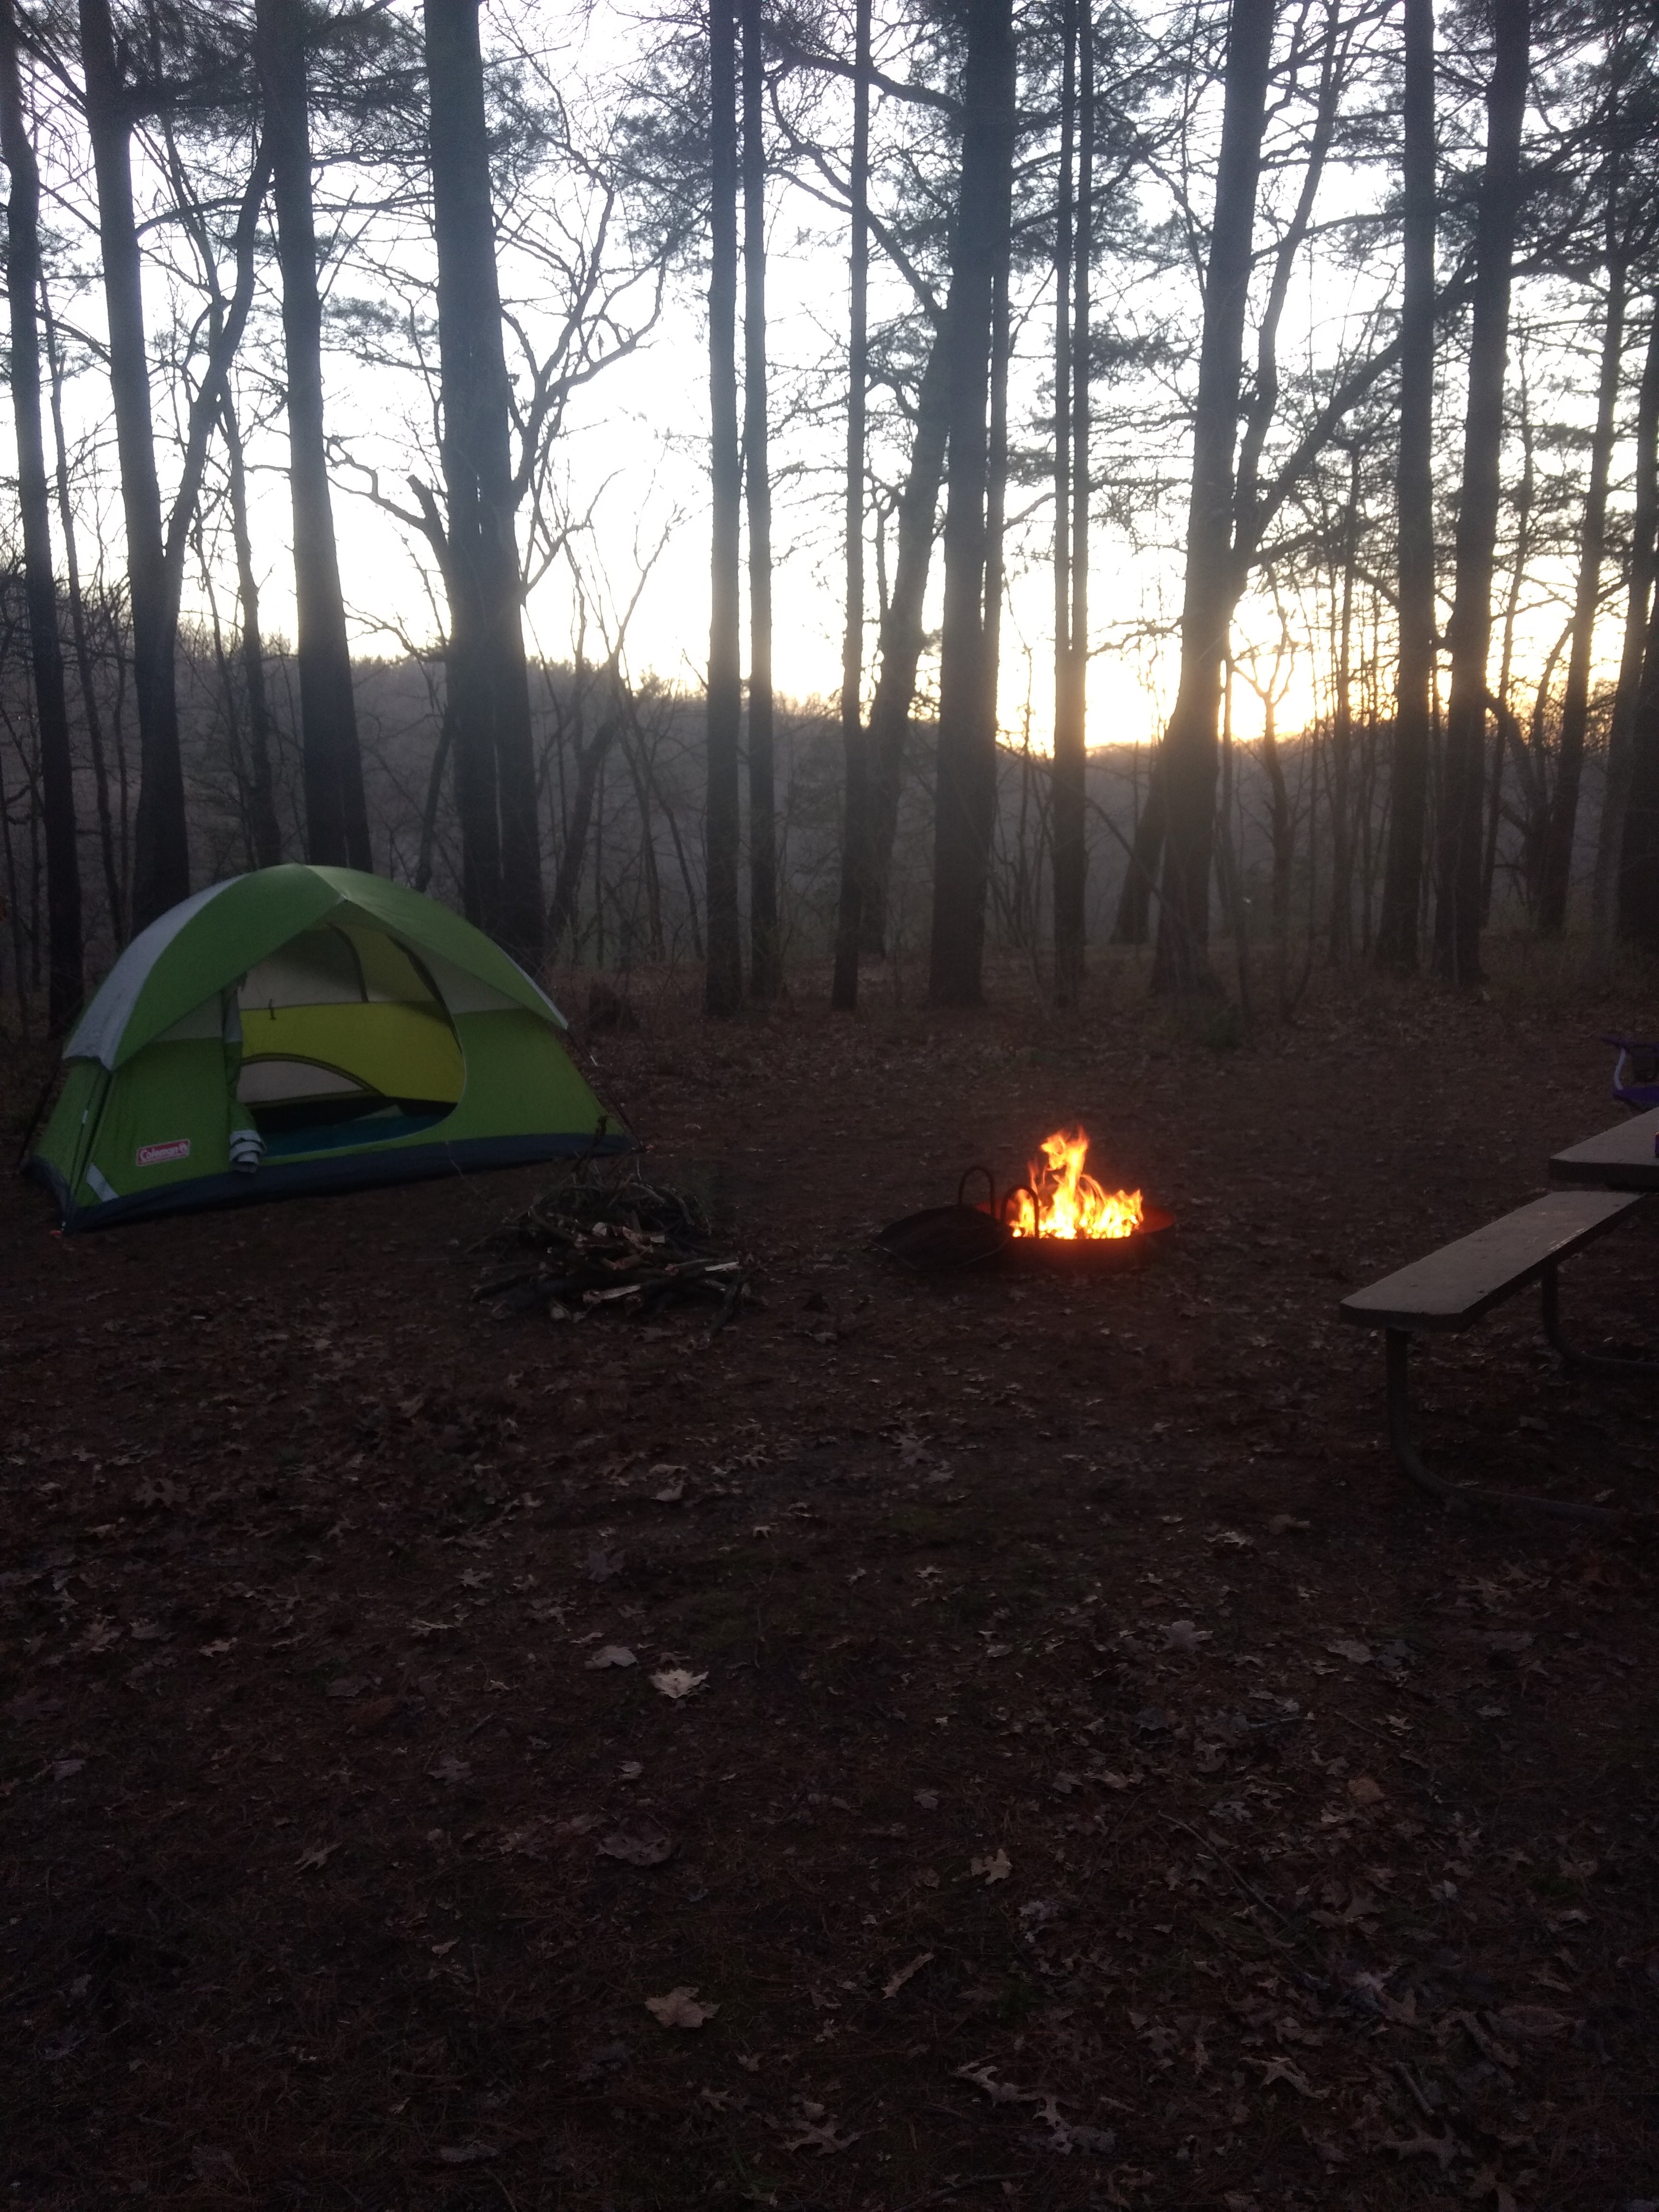 The first perfect camping weather weekend